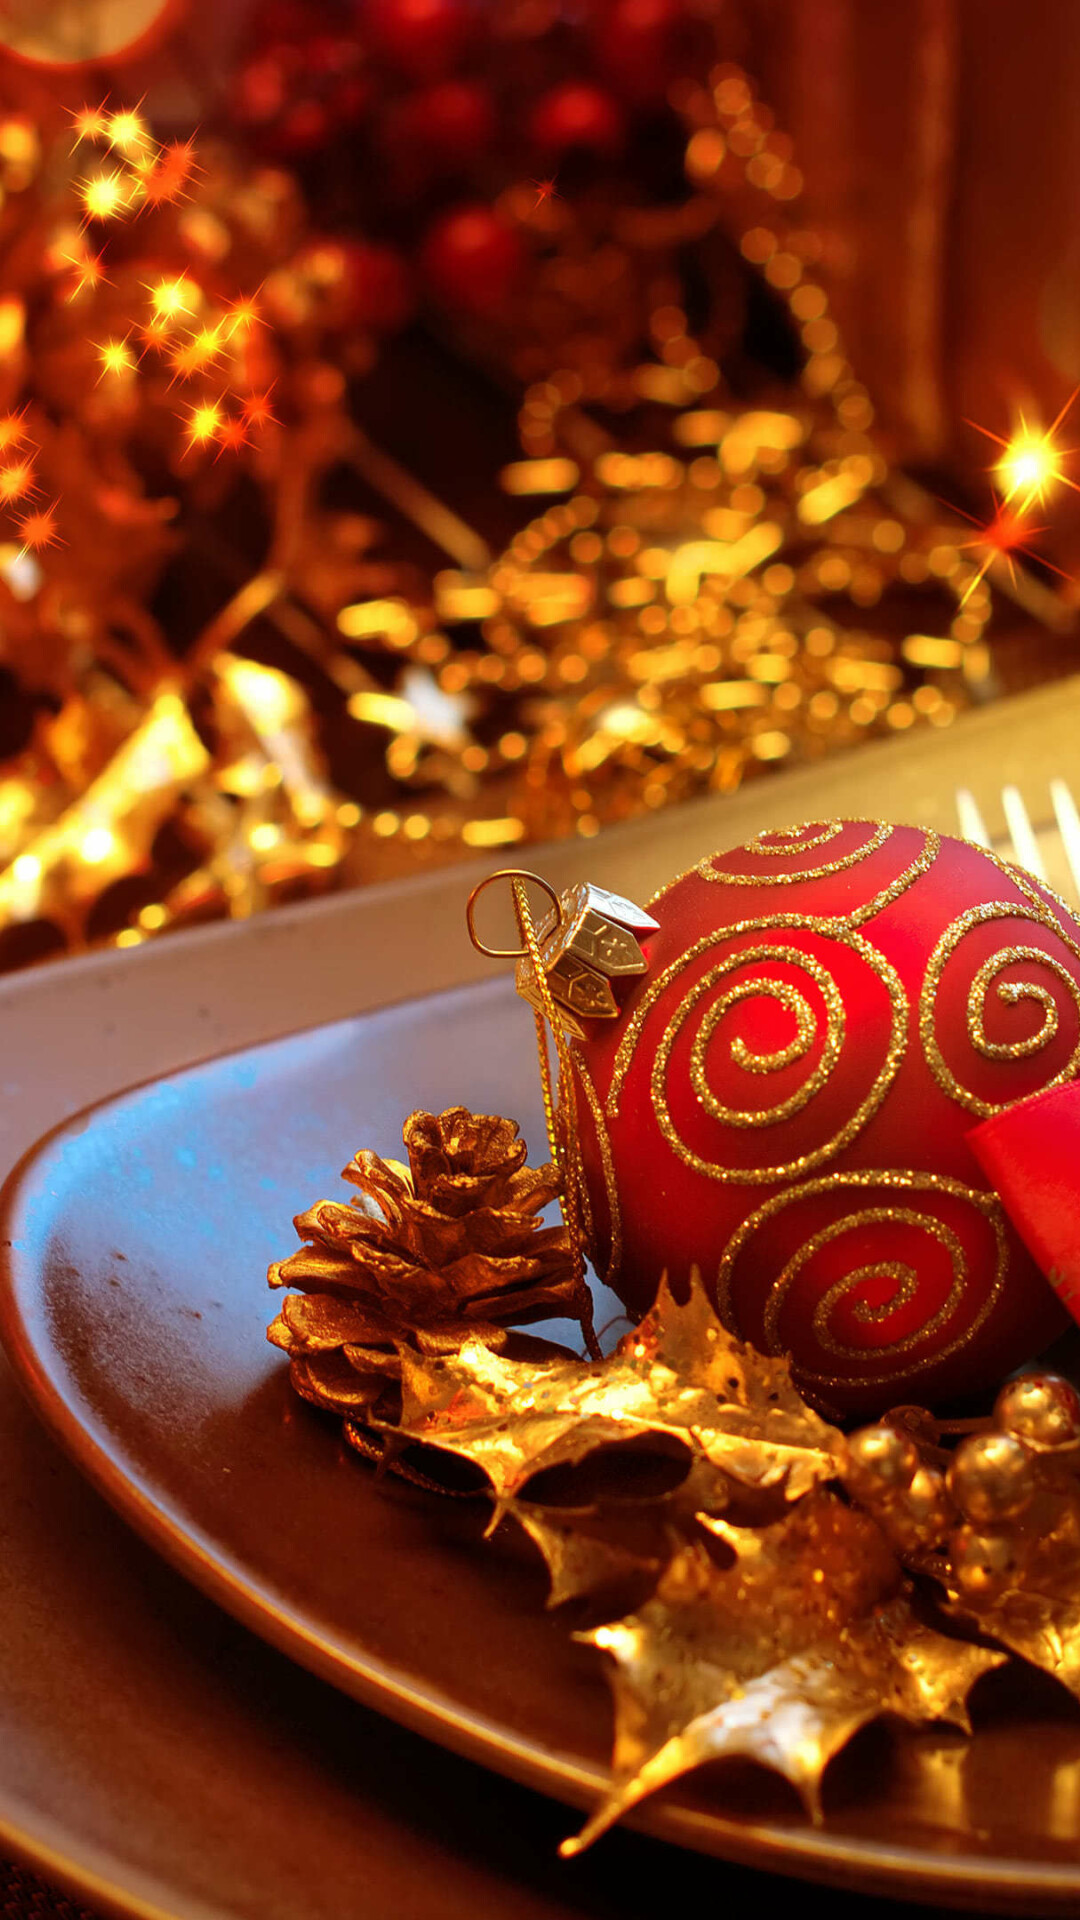 Decorations: Ornament used to embellish surroundings, Christmas bauble. 1080x1920 Full HD Background.